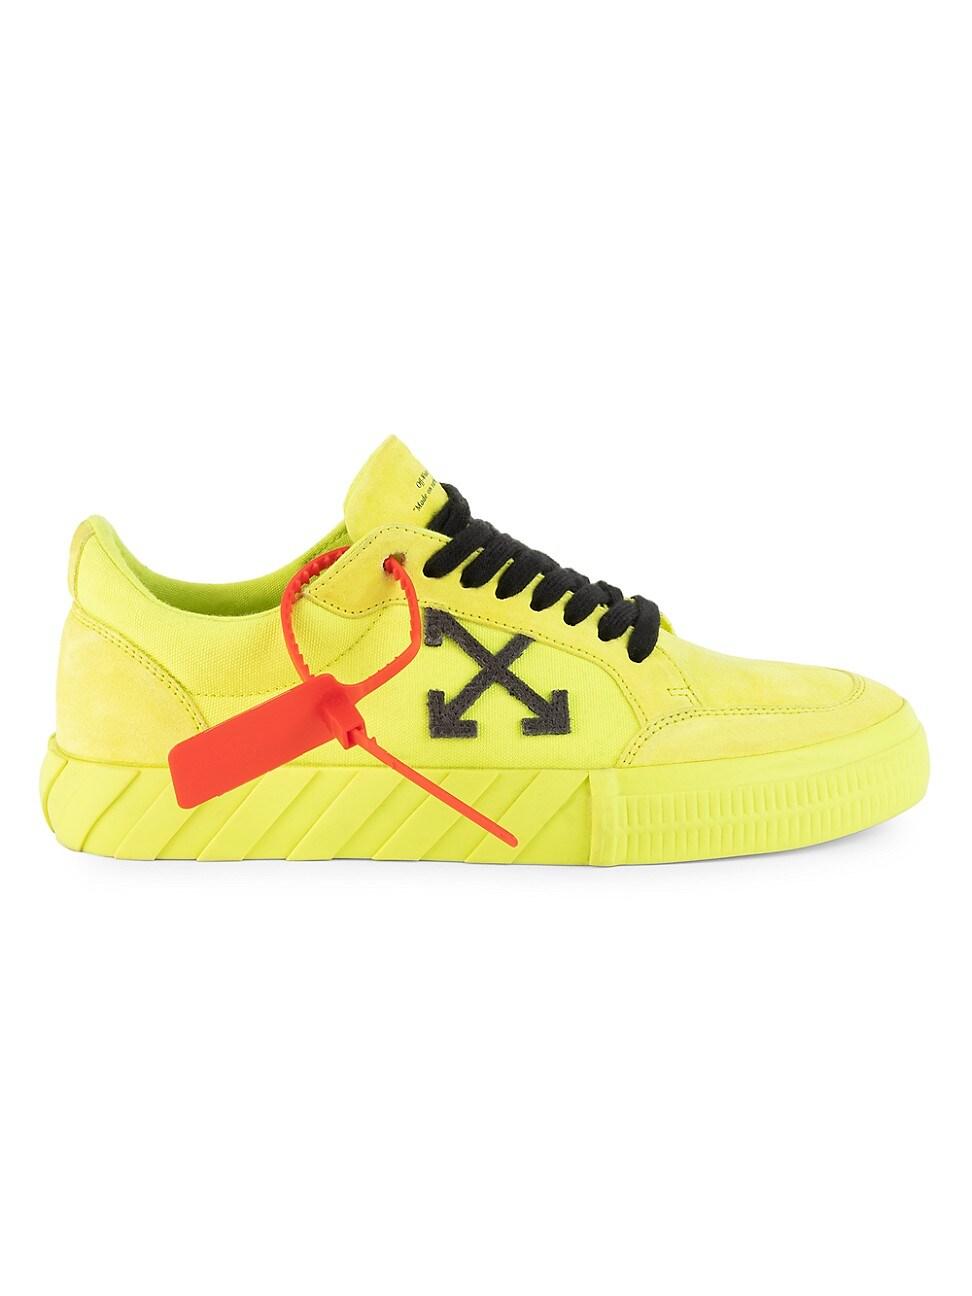 NEW OFF-WHITE C/O VIRGIL ABLOH Yellow & Red Logo Gloves Size 10 $420